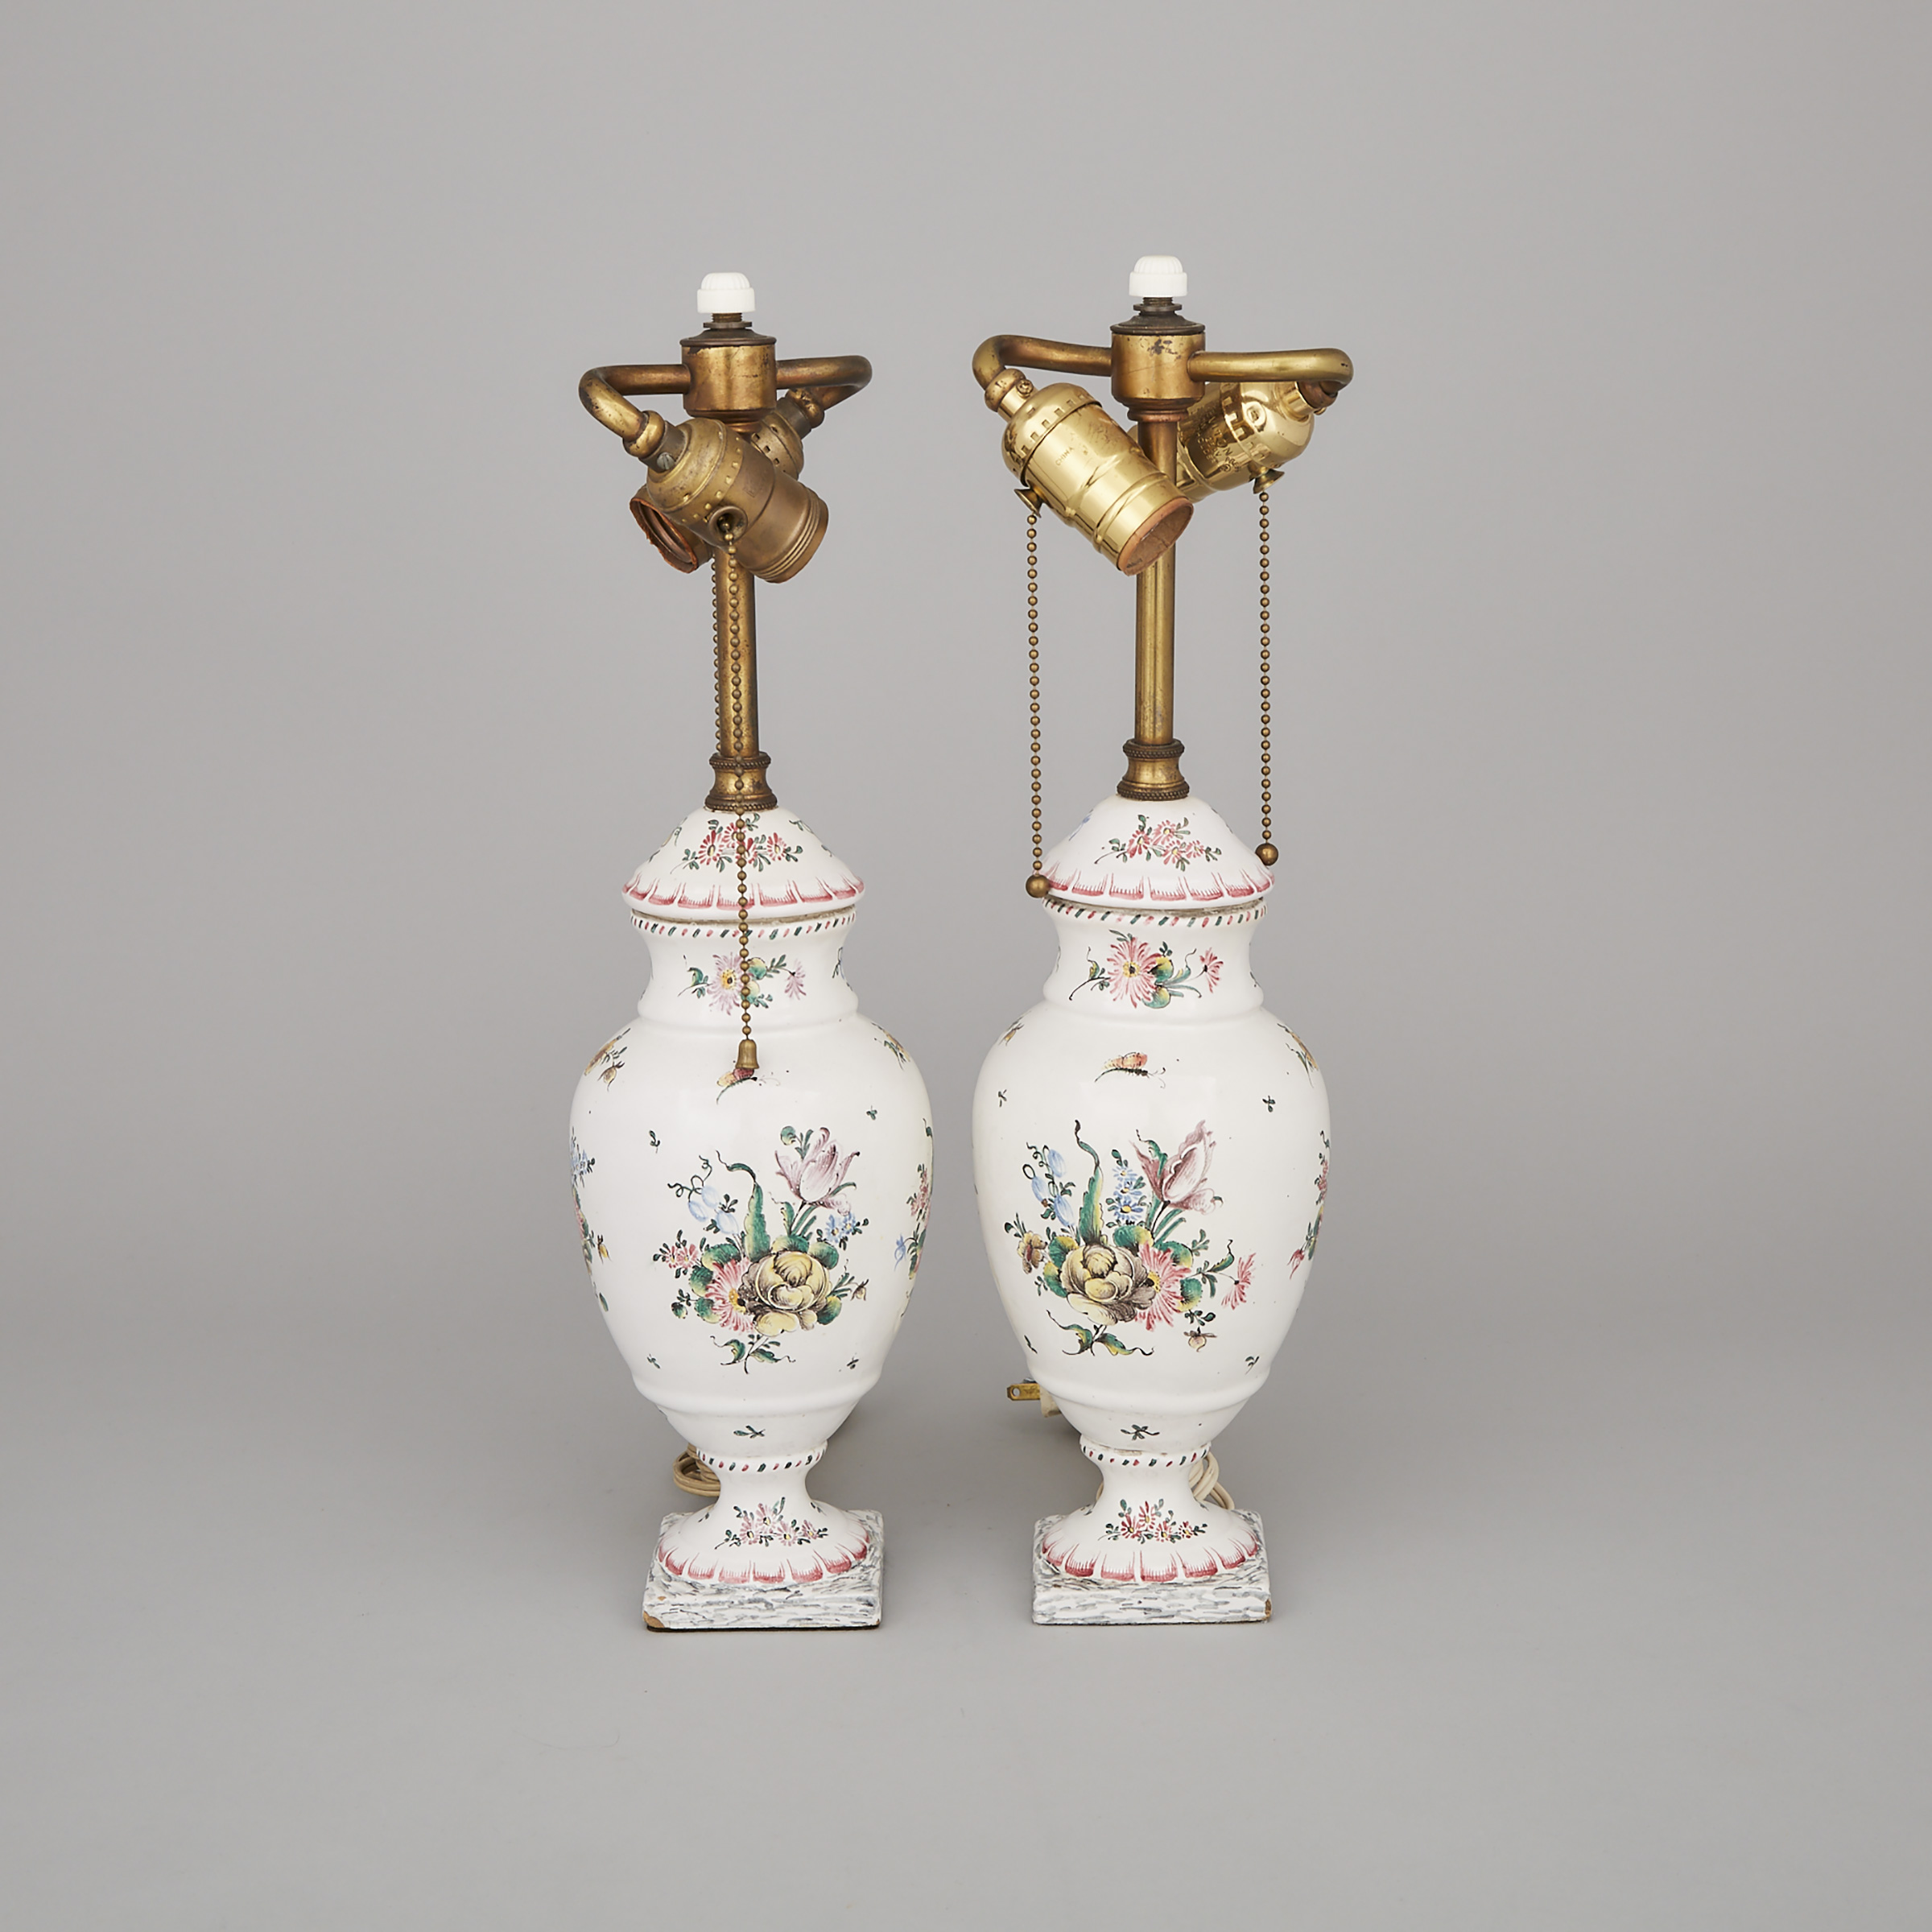 Pair of French Faience Table Lamps, 19th/20th century